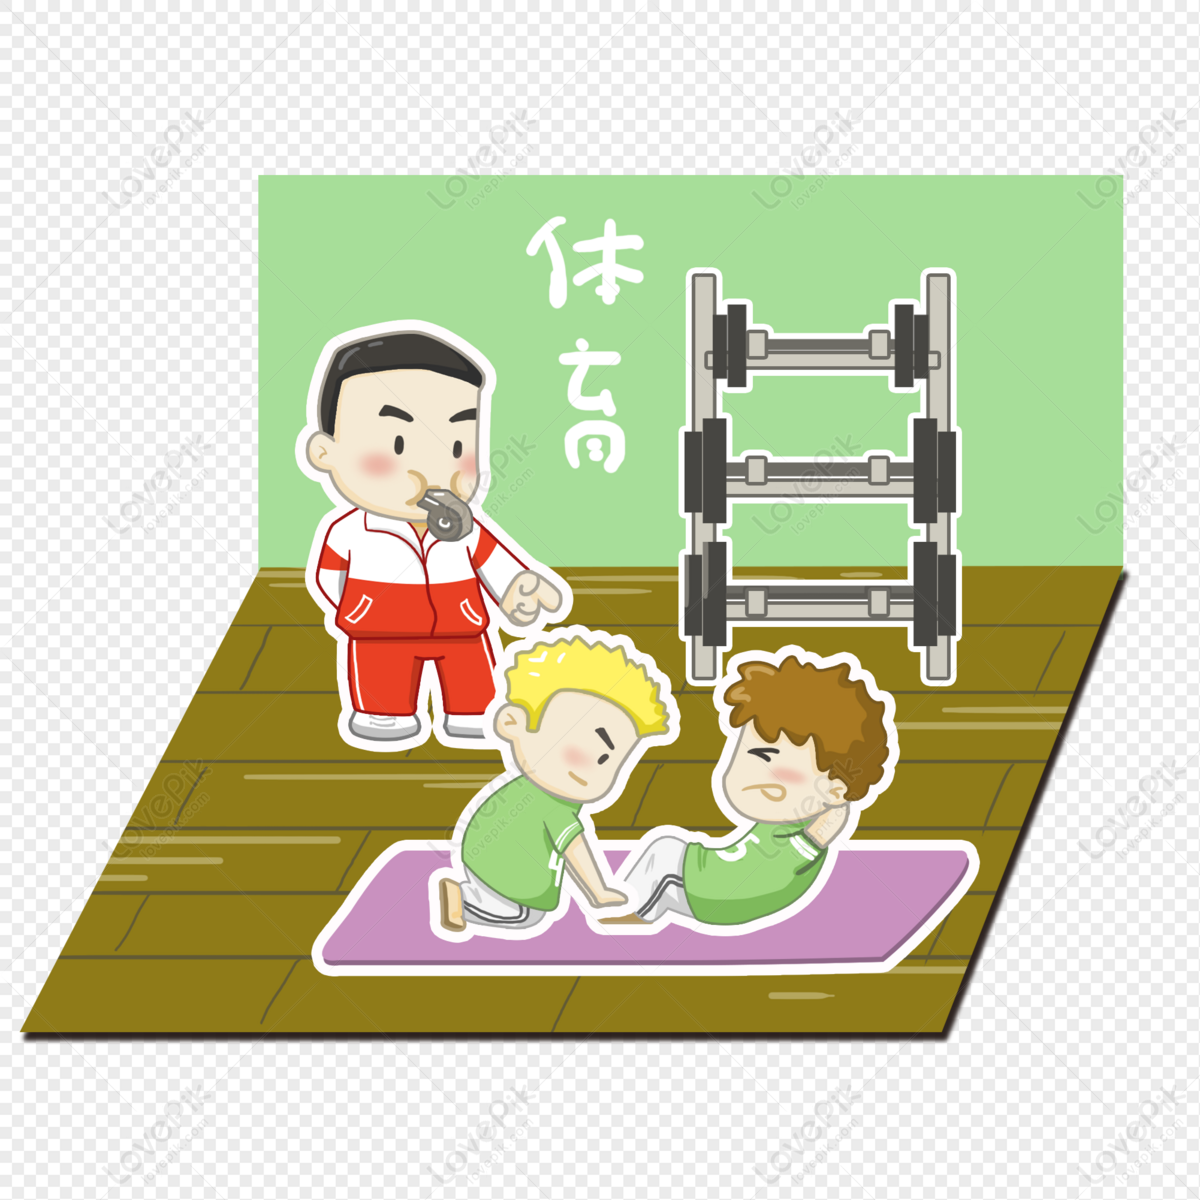 Students In Physical Education Class PNG Hd Transparent Image And Clipart  Image For Free Download - Lovepik | 401563214